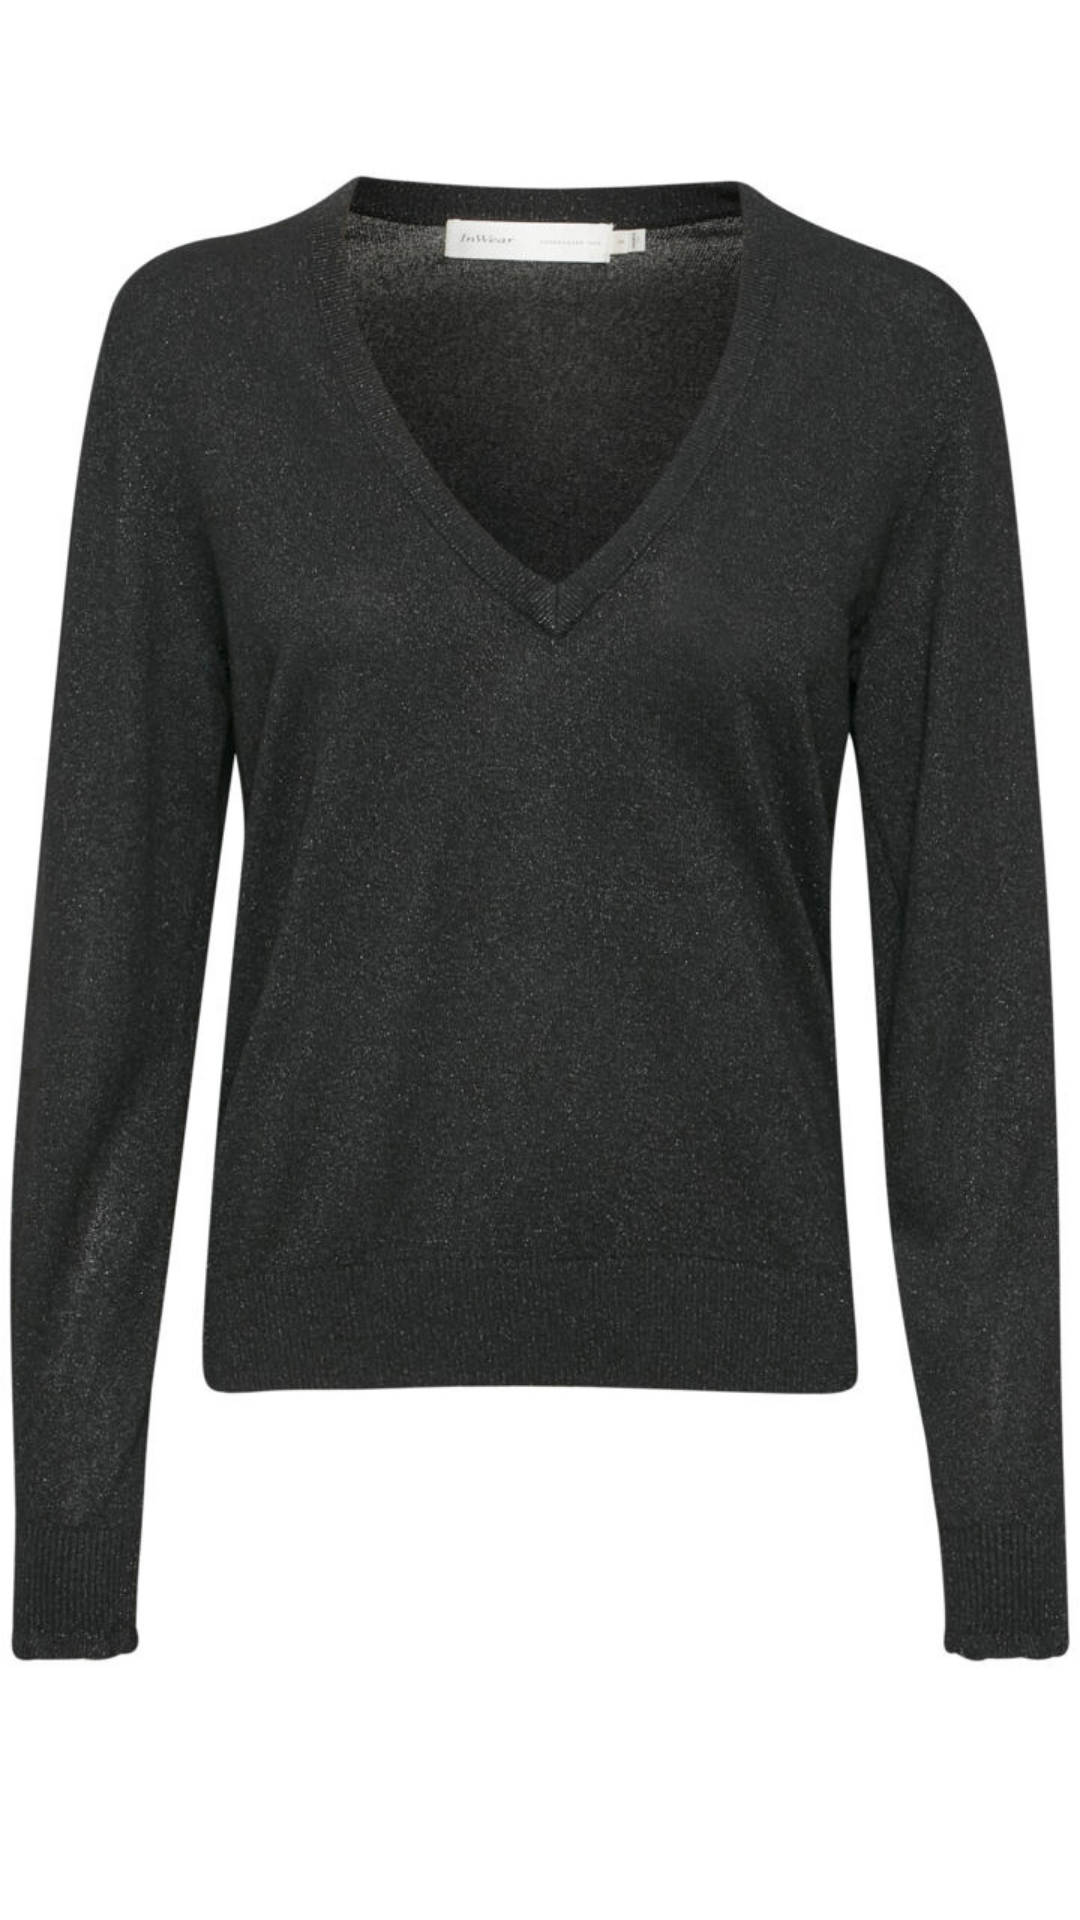 InWear Elise Black Sparkly Knitted Pullover - Jezabel Boutique